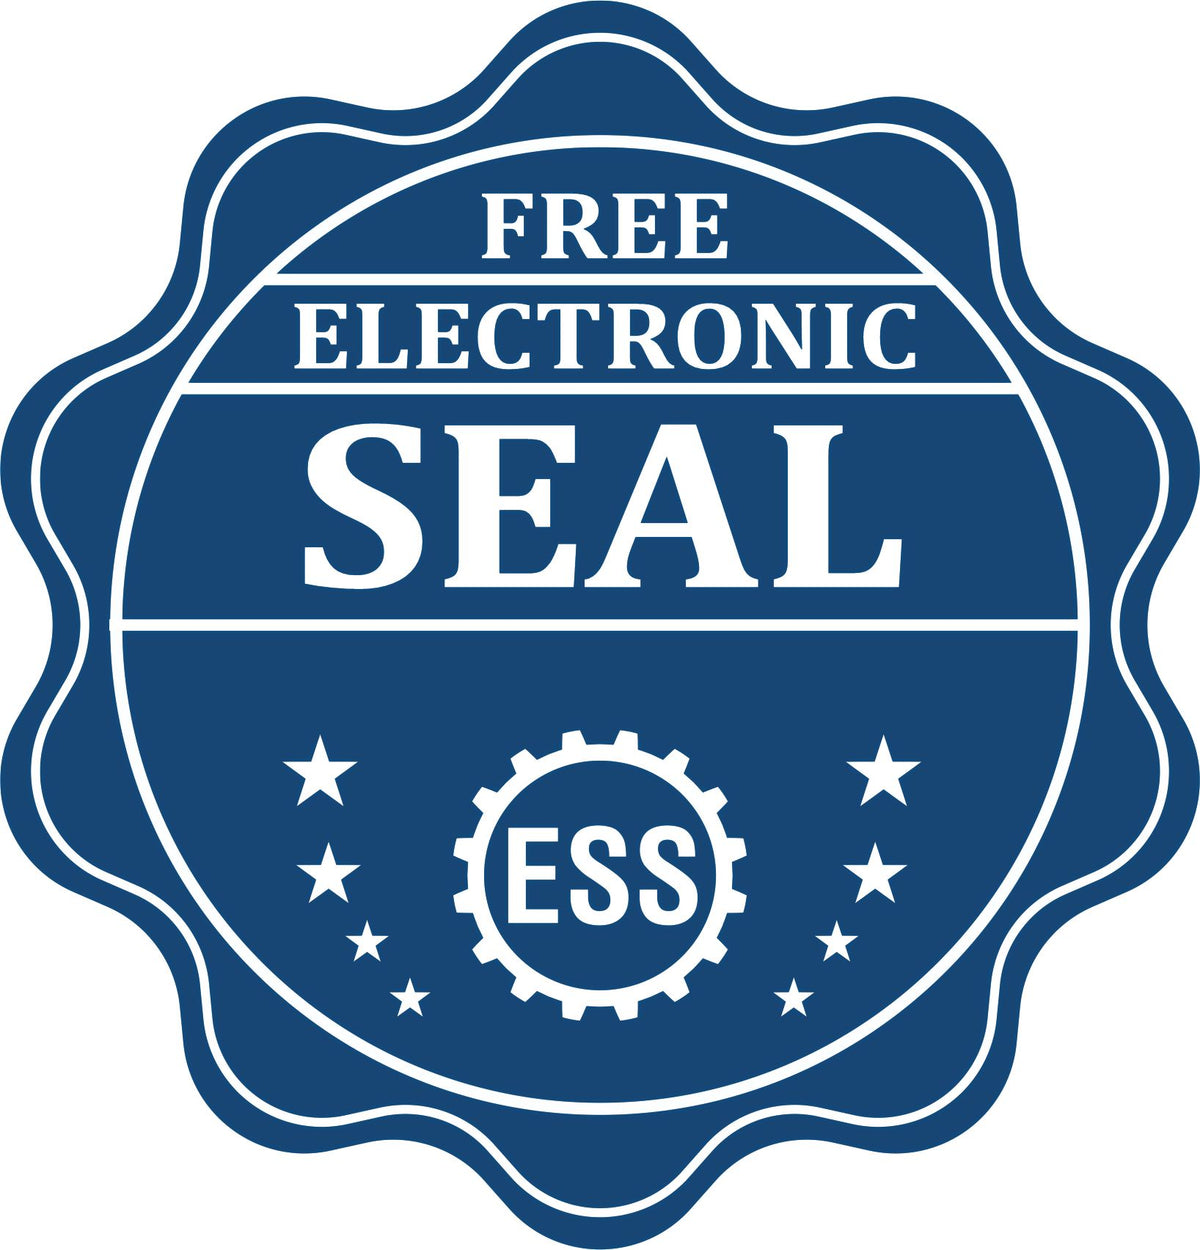 A badge showing a free electronic seal for the Gift Wyoming Architect Seal with stars and the ESS gear on the emblem.